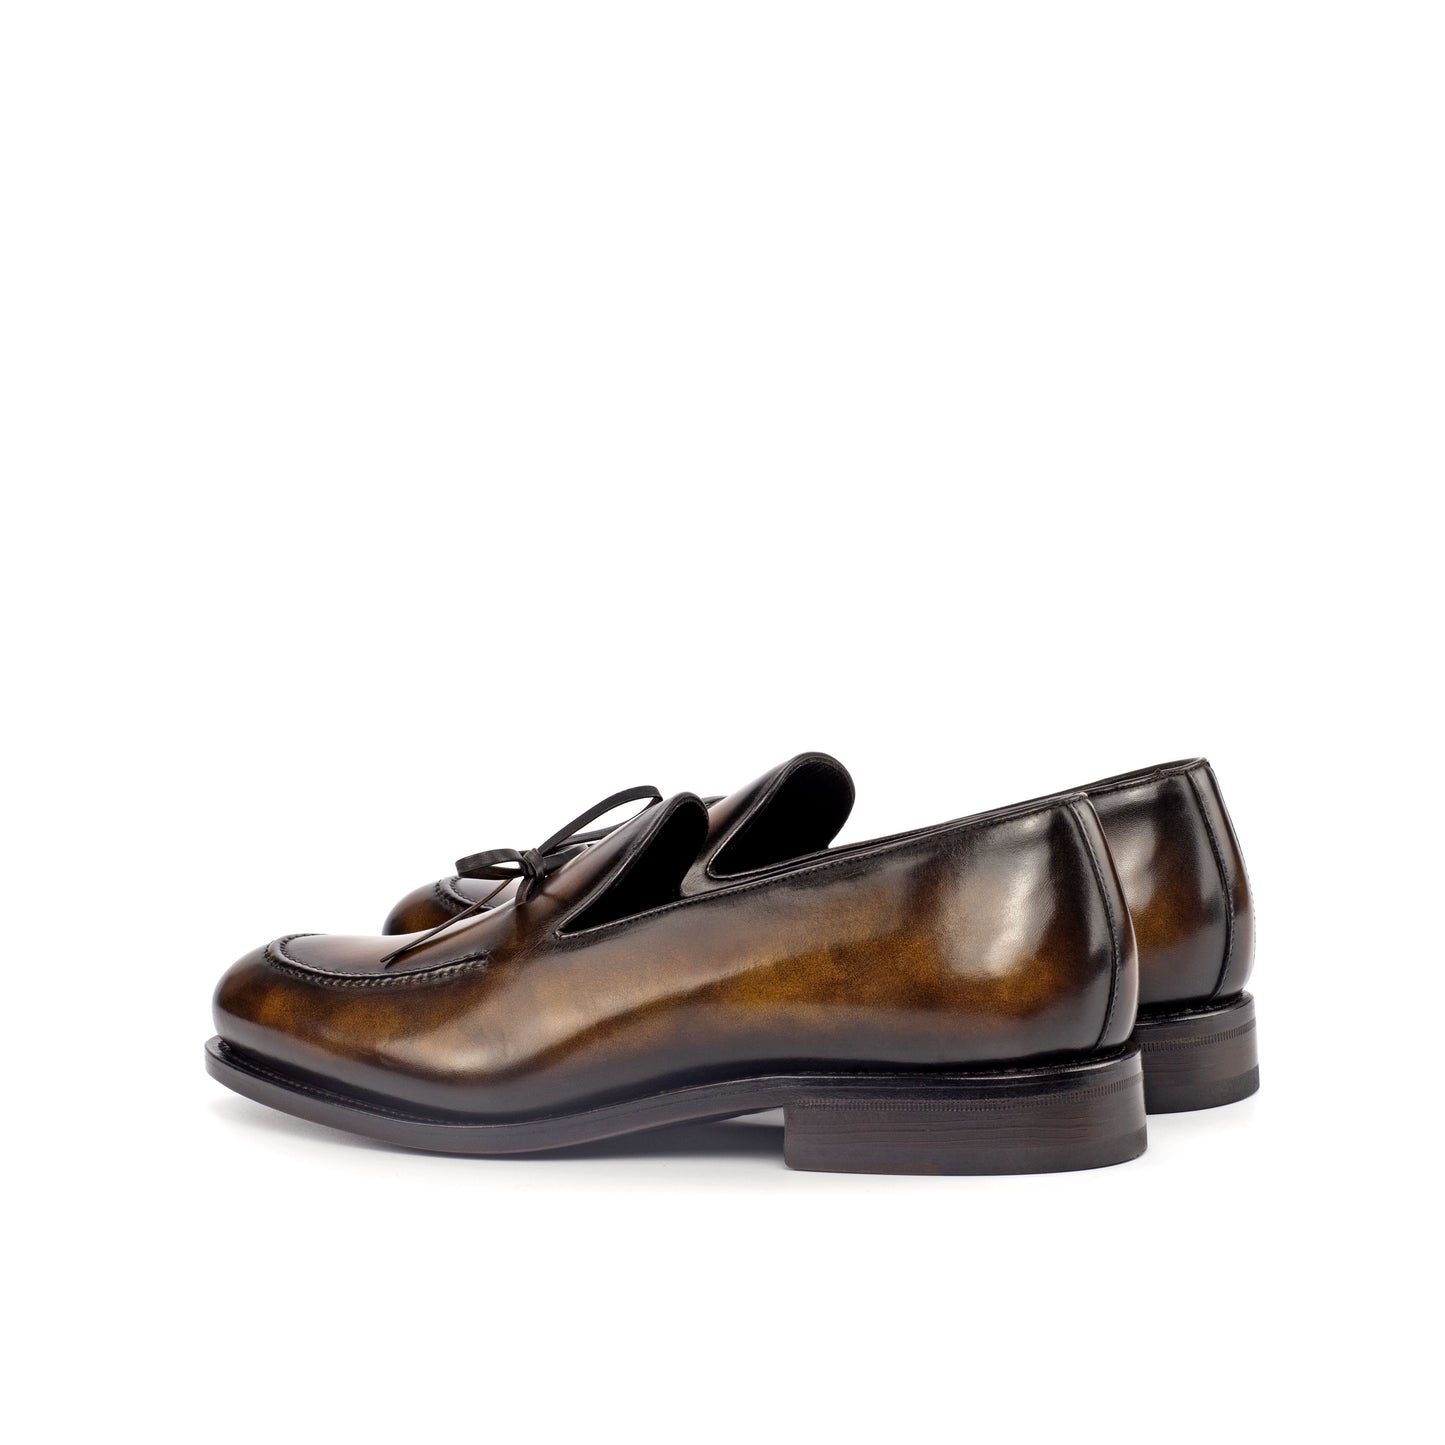 Loafer tobacco patina